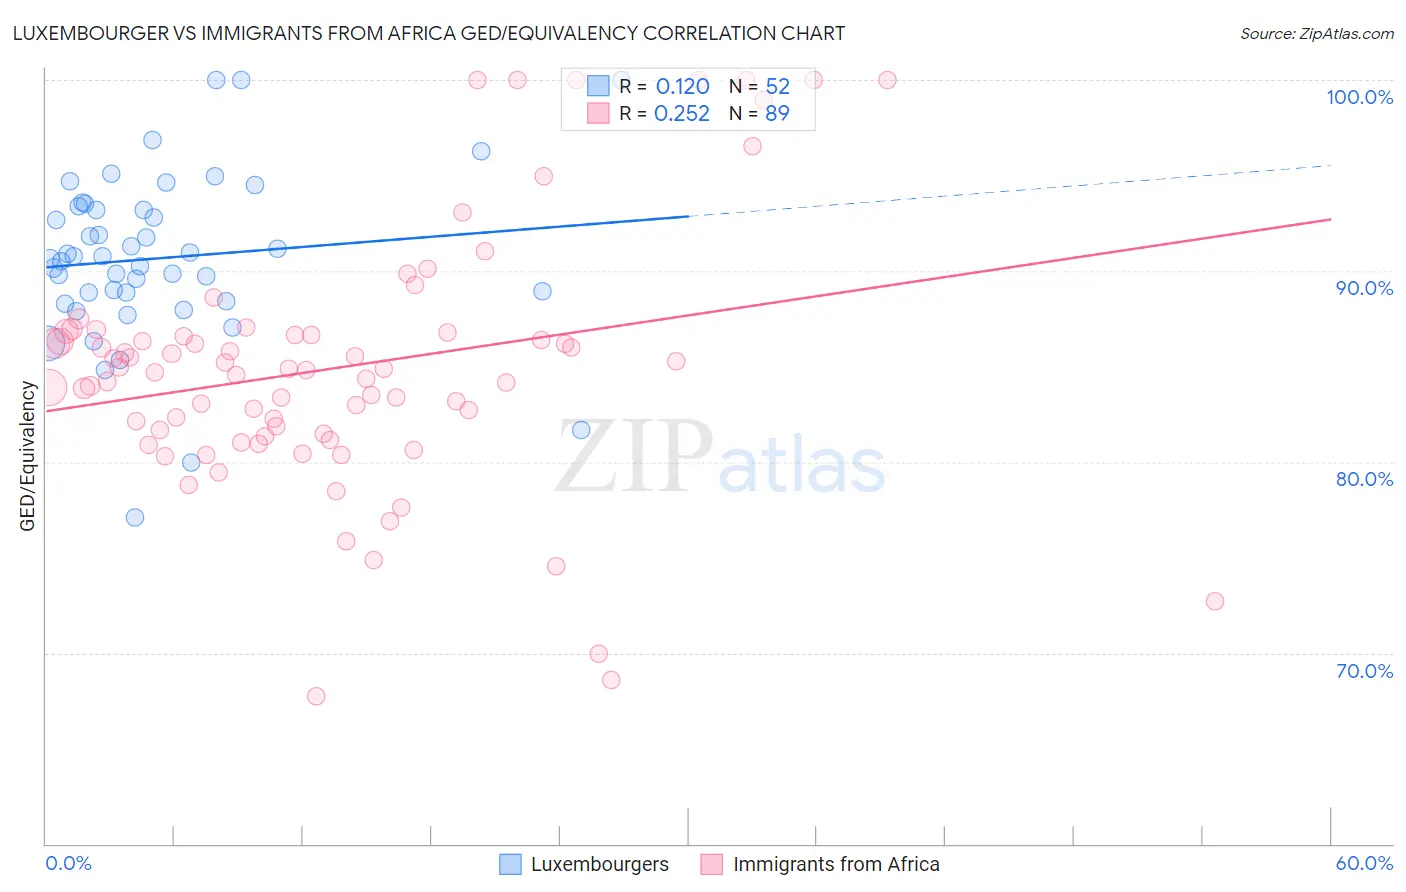 Luxembourger vs Immigrants from Africa GED/Equivalency